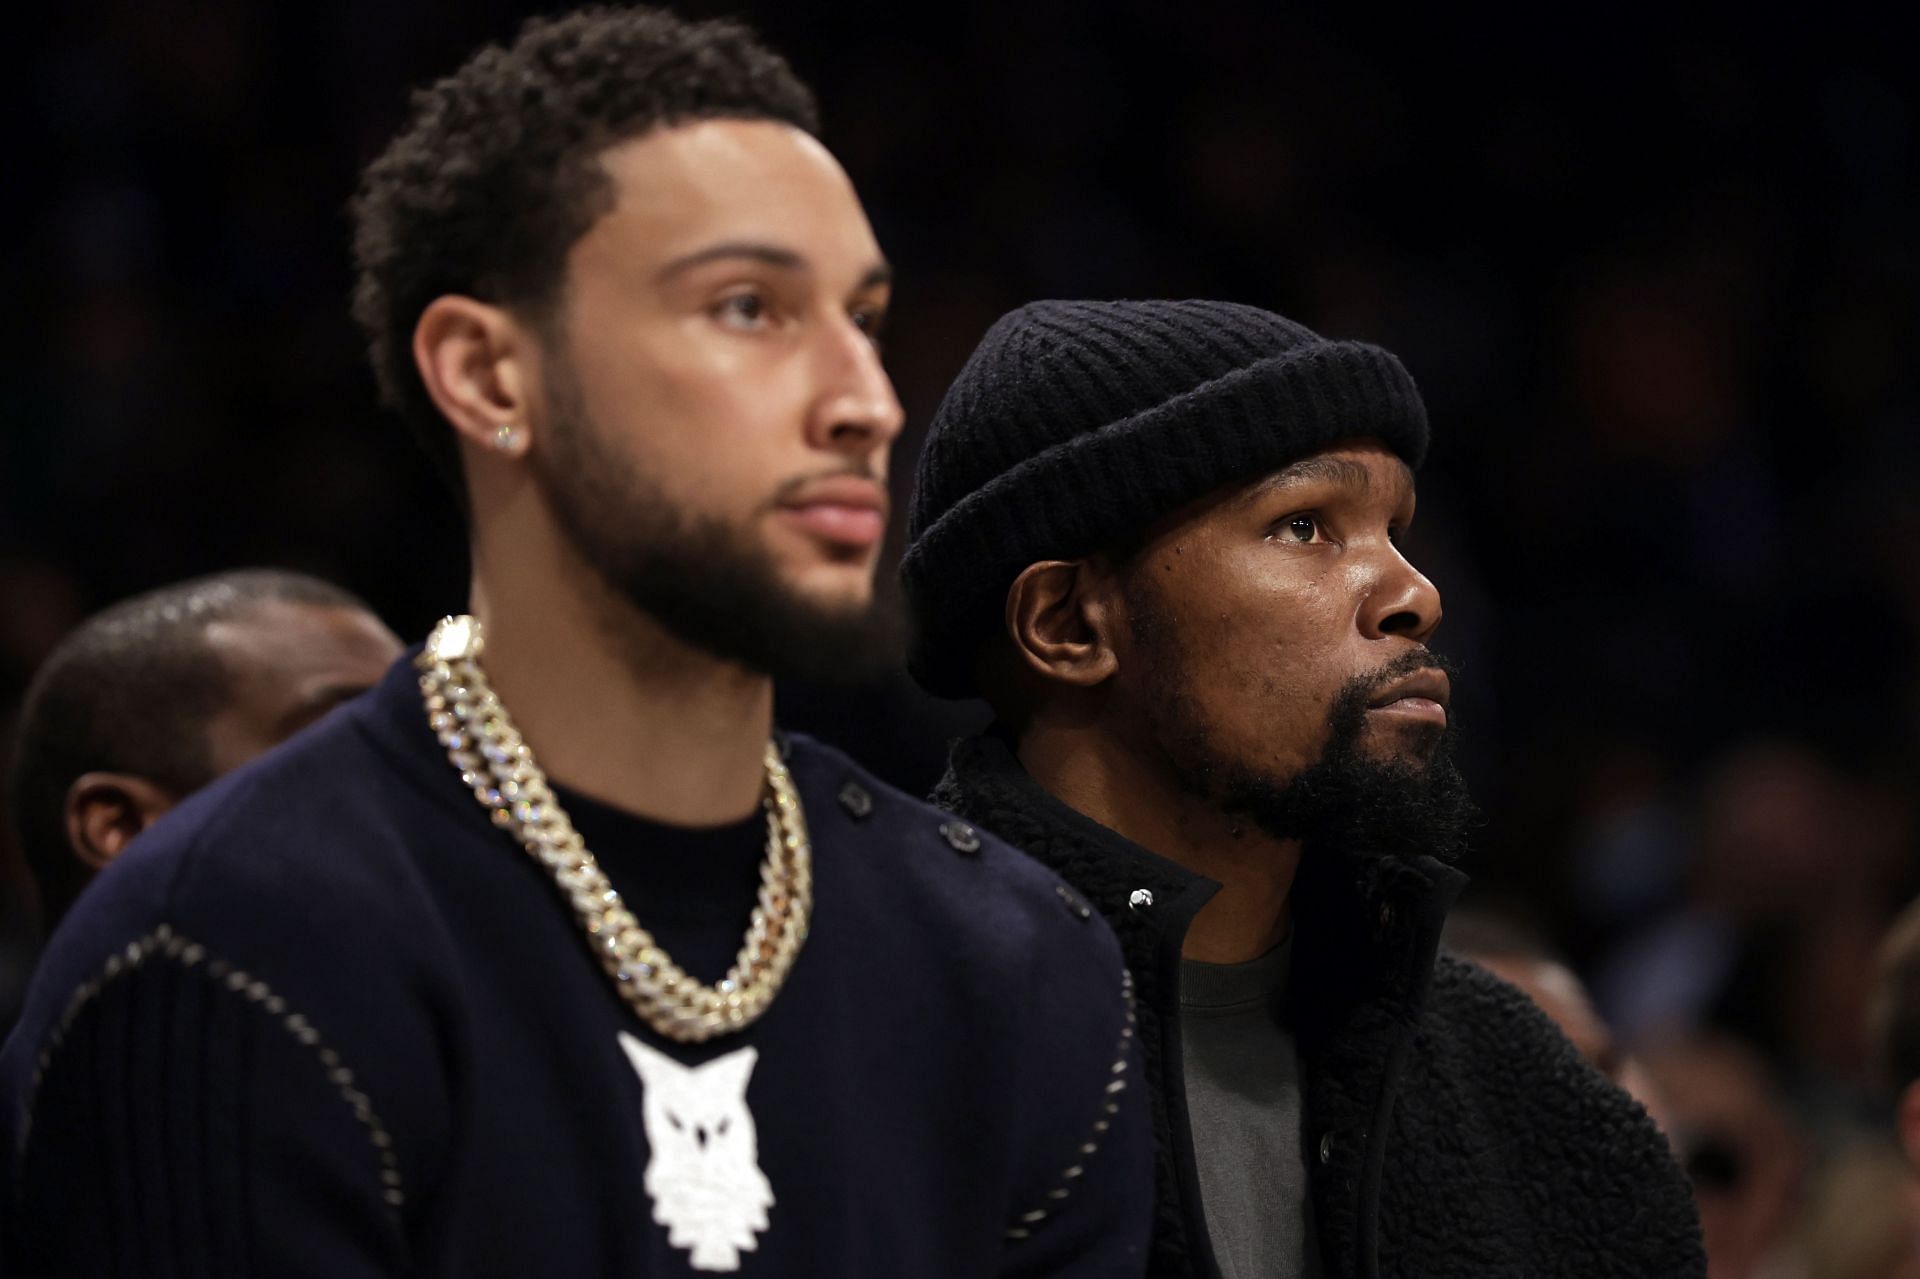 Ben Simmons and Kevin Durant watch the Boston Celtics v Brooklyn Nets game from the sidelines